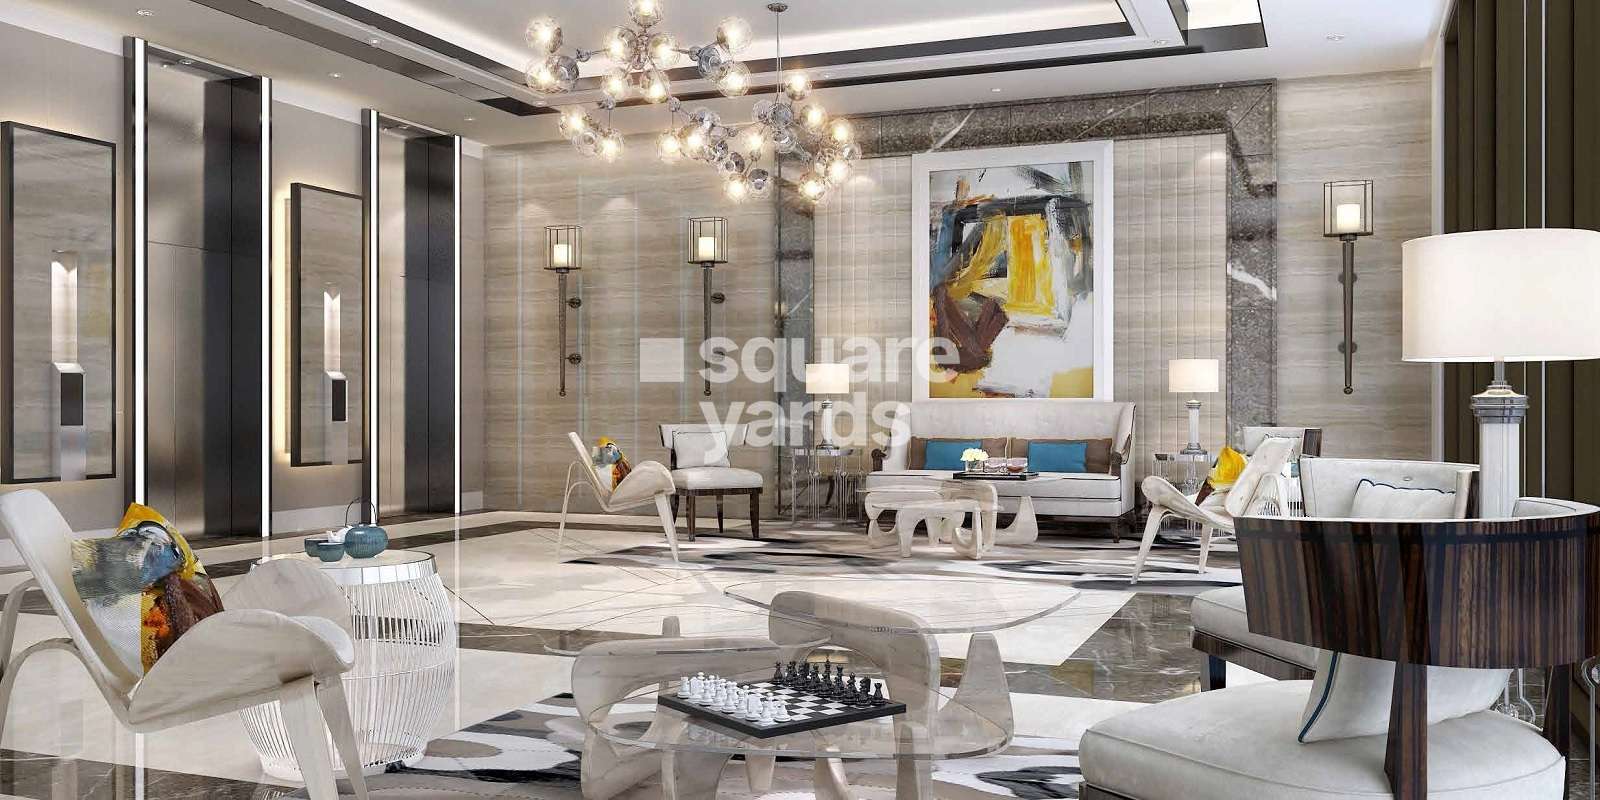 al haseen residences project apartment interiors8 7092